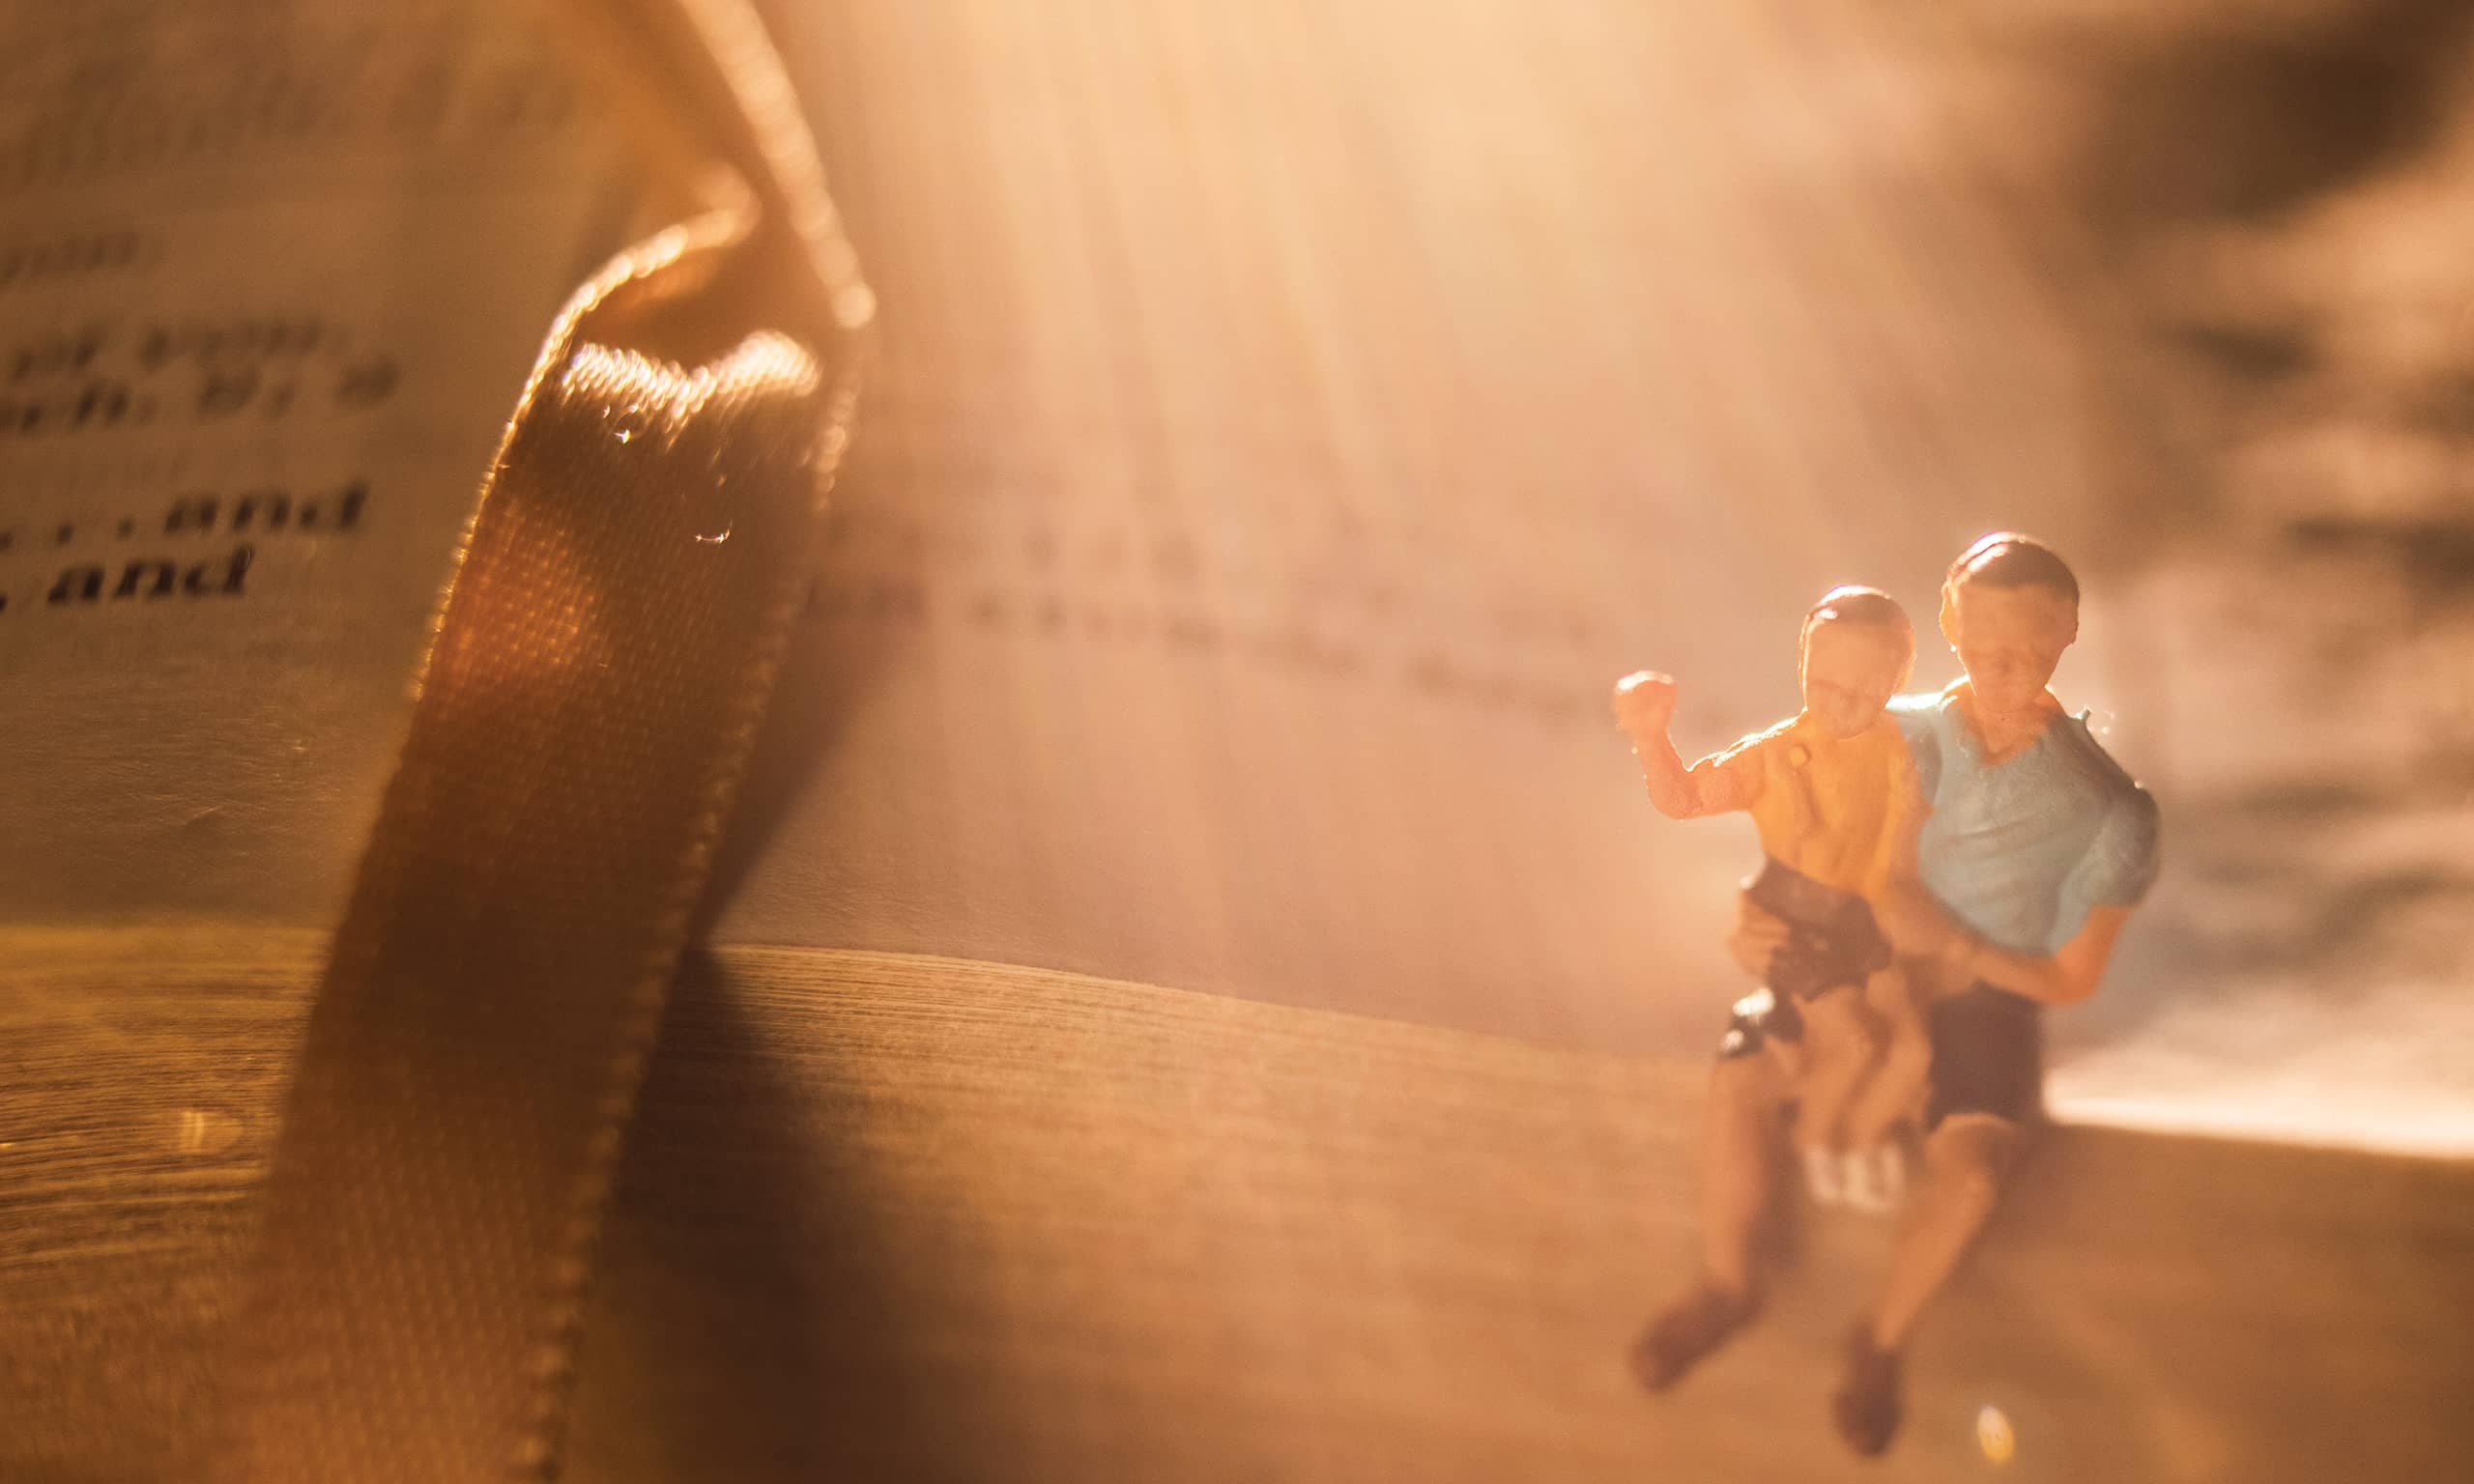 Small figurines of a parent and child sit on the edge of scripture pages bathed in golden light.